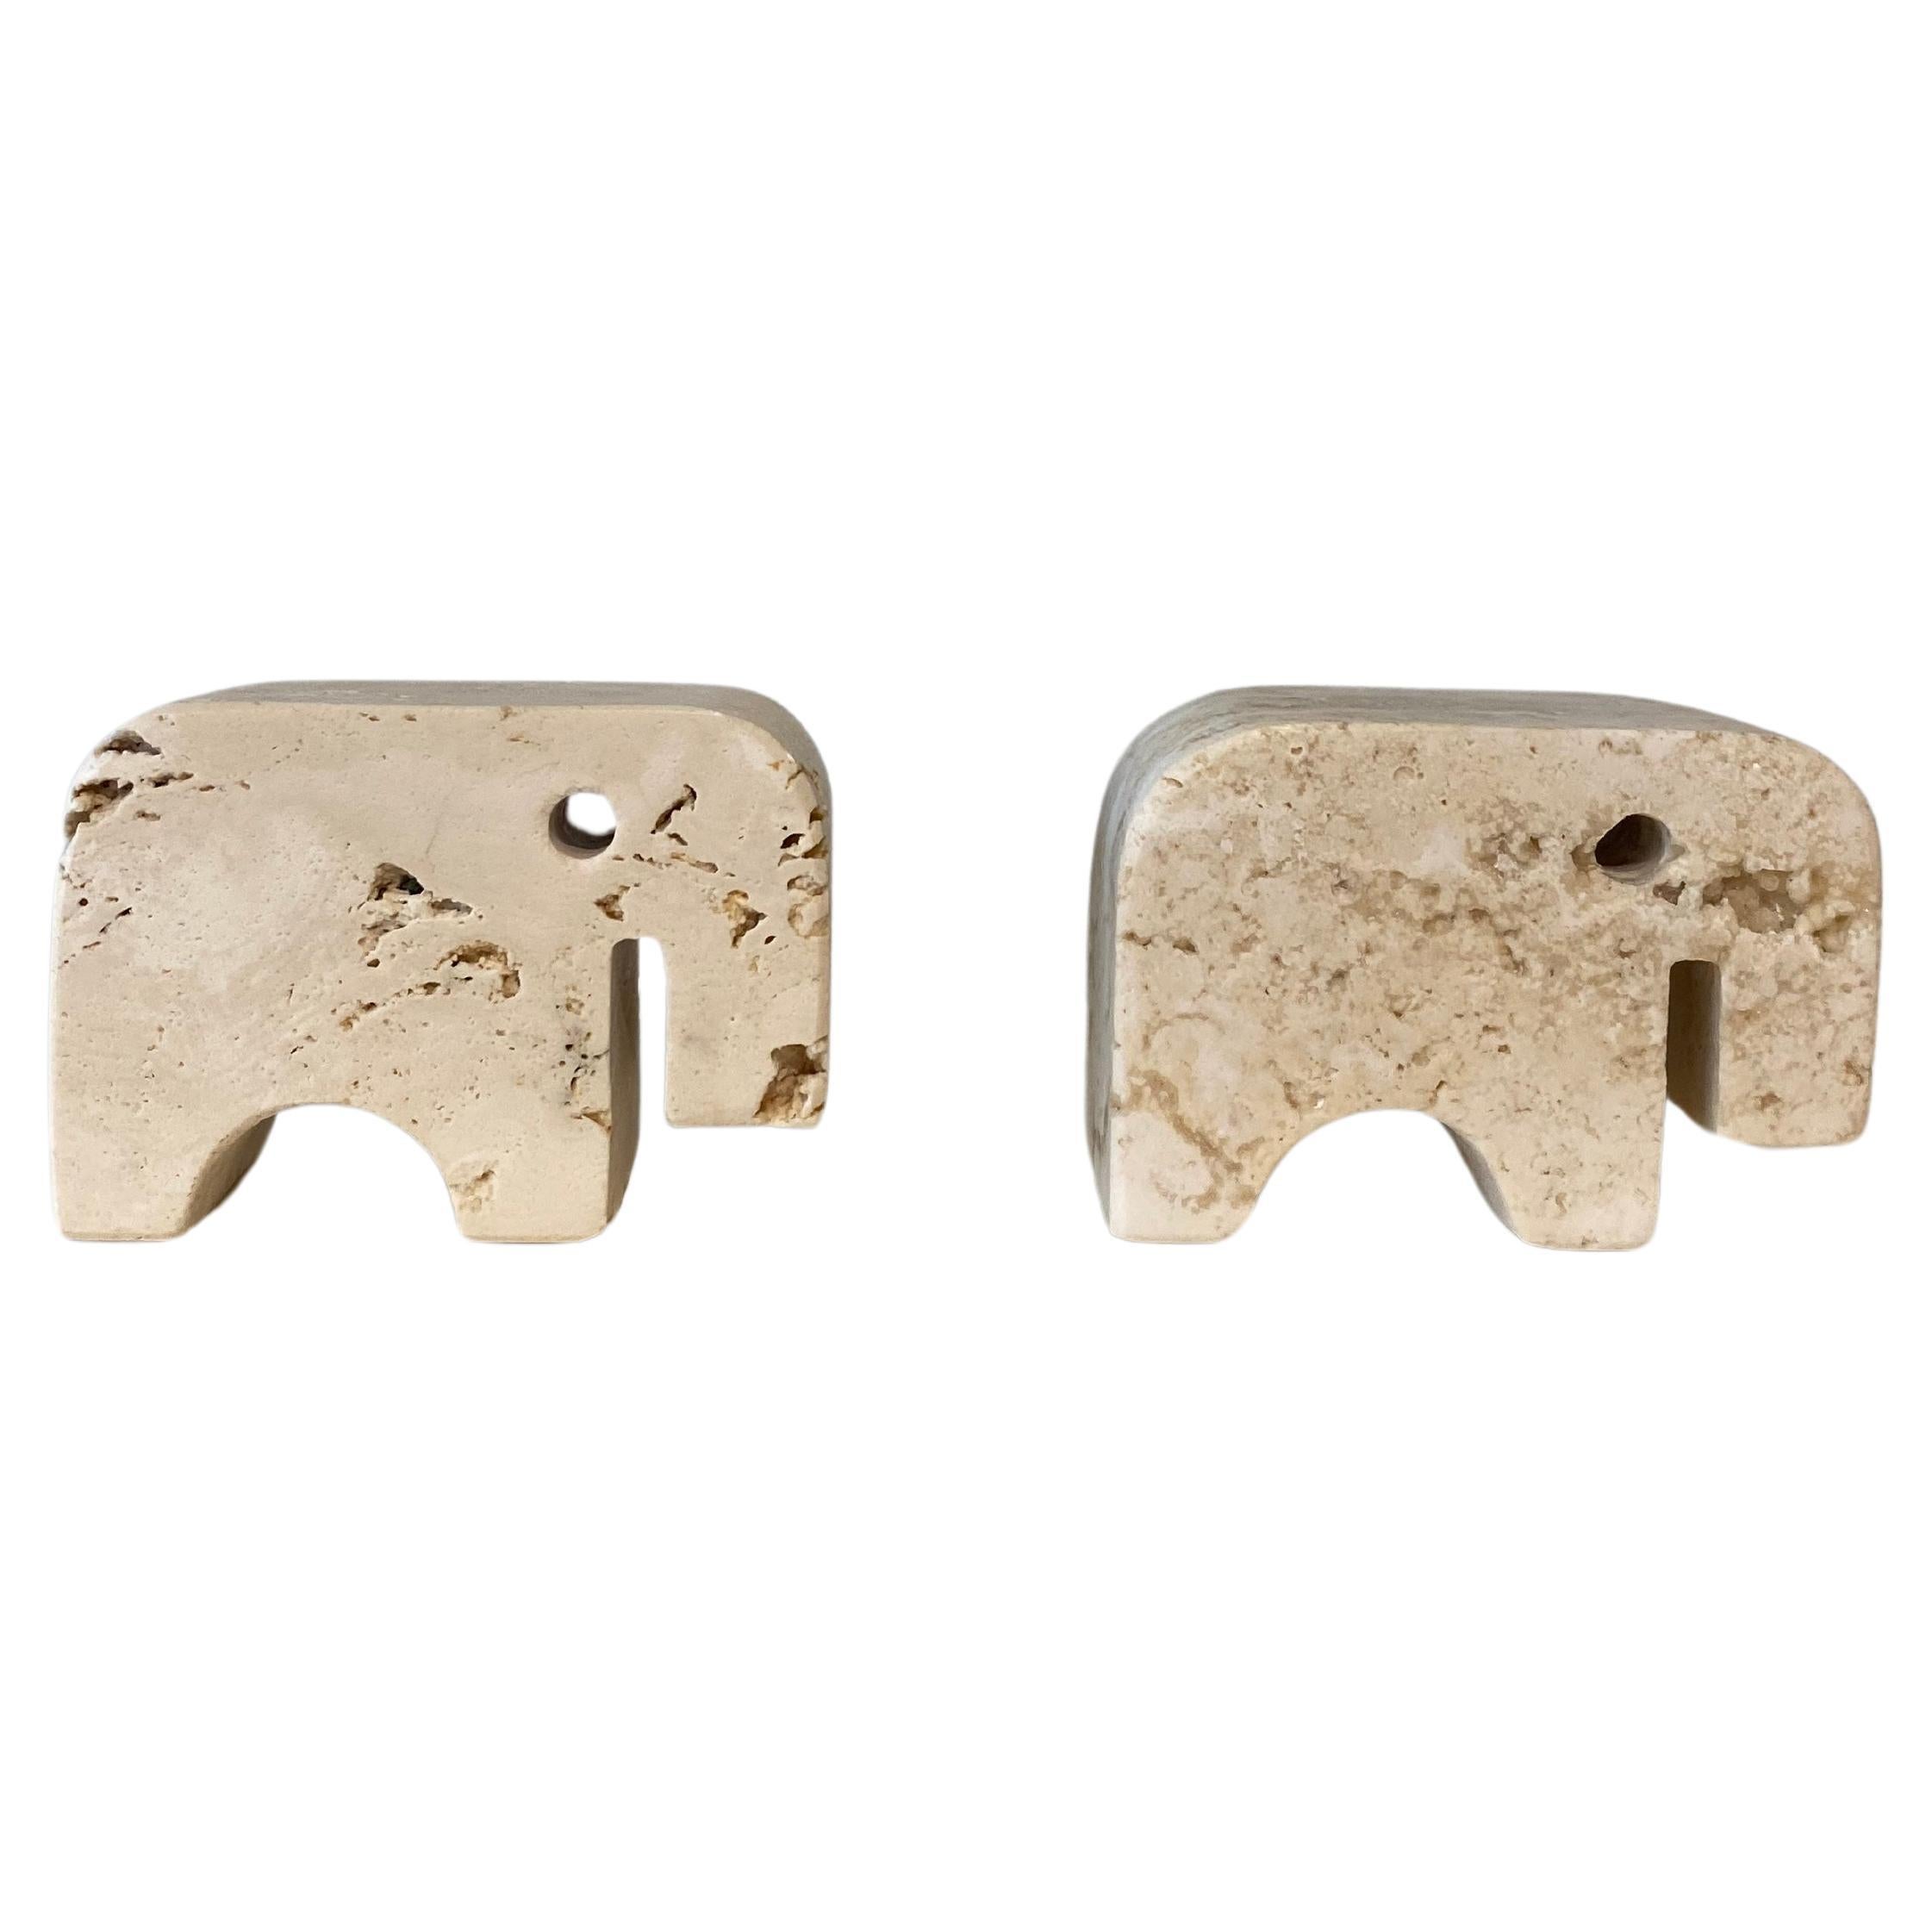 Fratelli Mannelli Travertine Elephant Sculptures, Italy circa 1970's For Sale